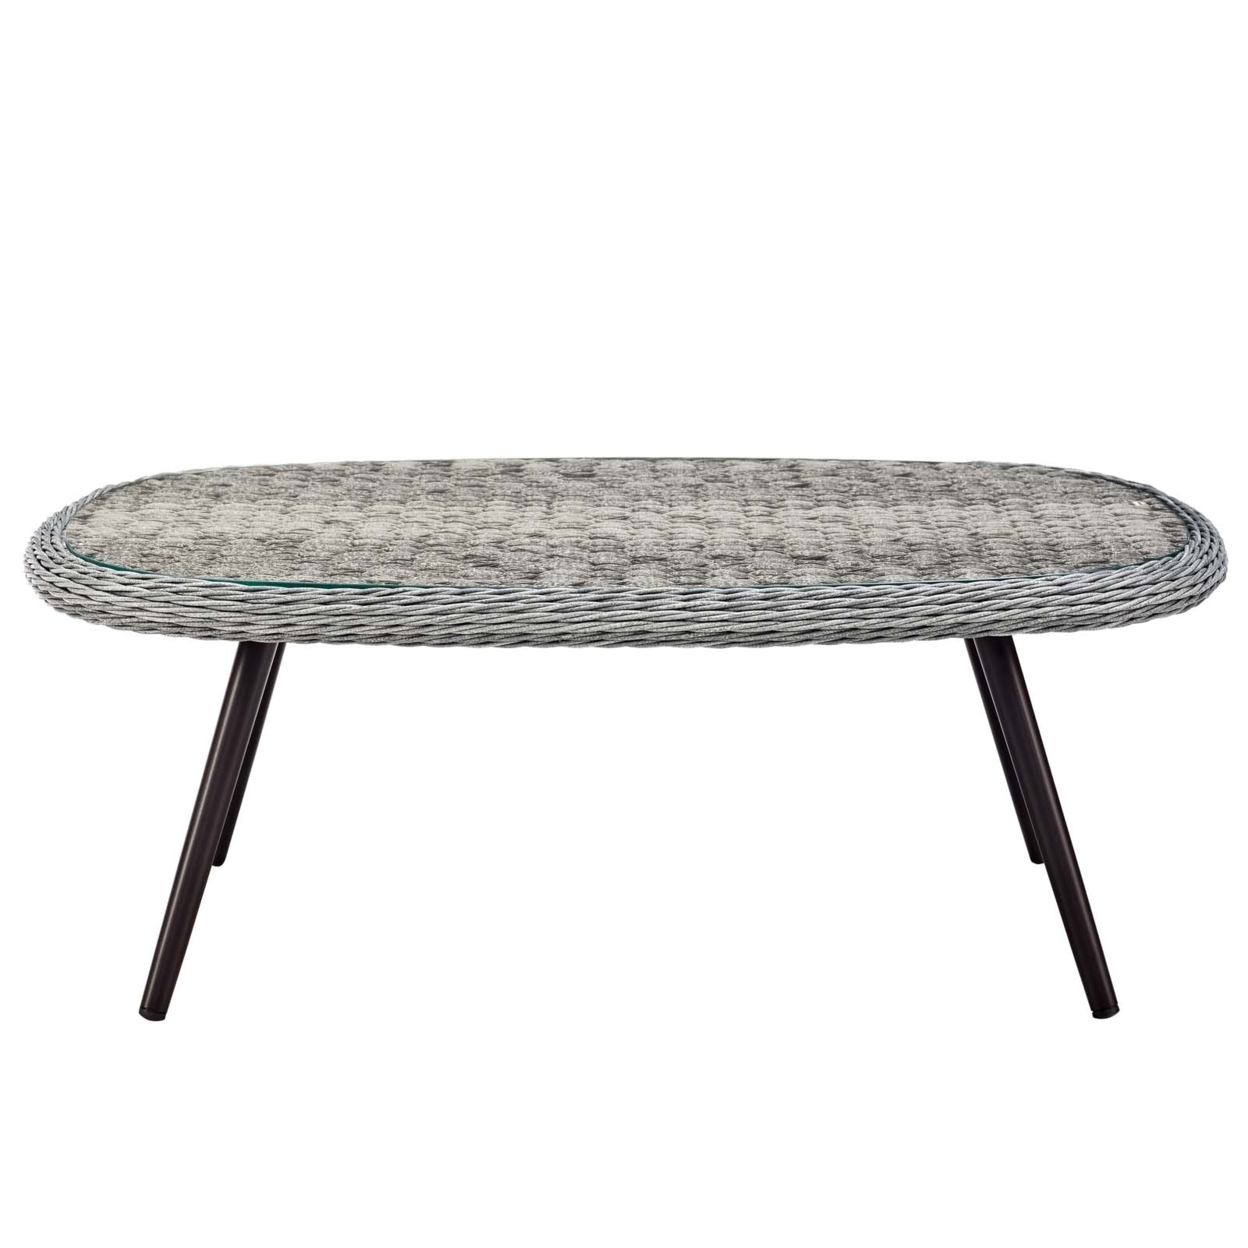 Endeavor Outdoor Patio Wicker Rattan Coffee Table (3026-GRY) - image 3 of 6